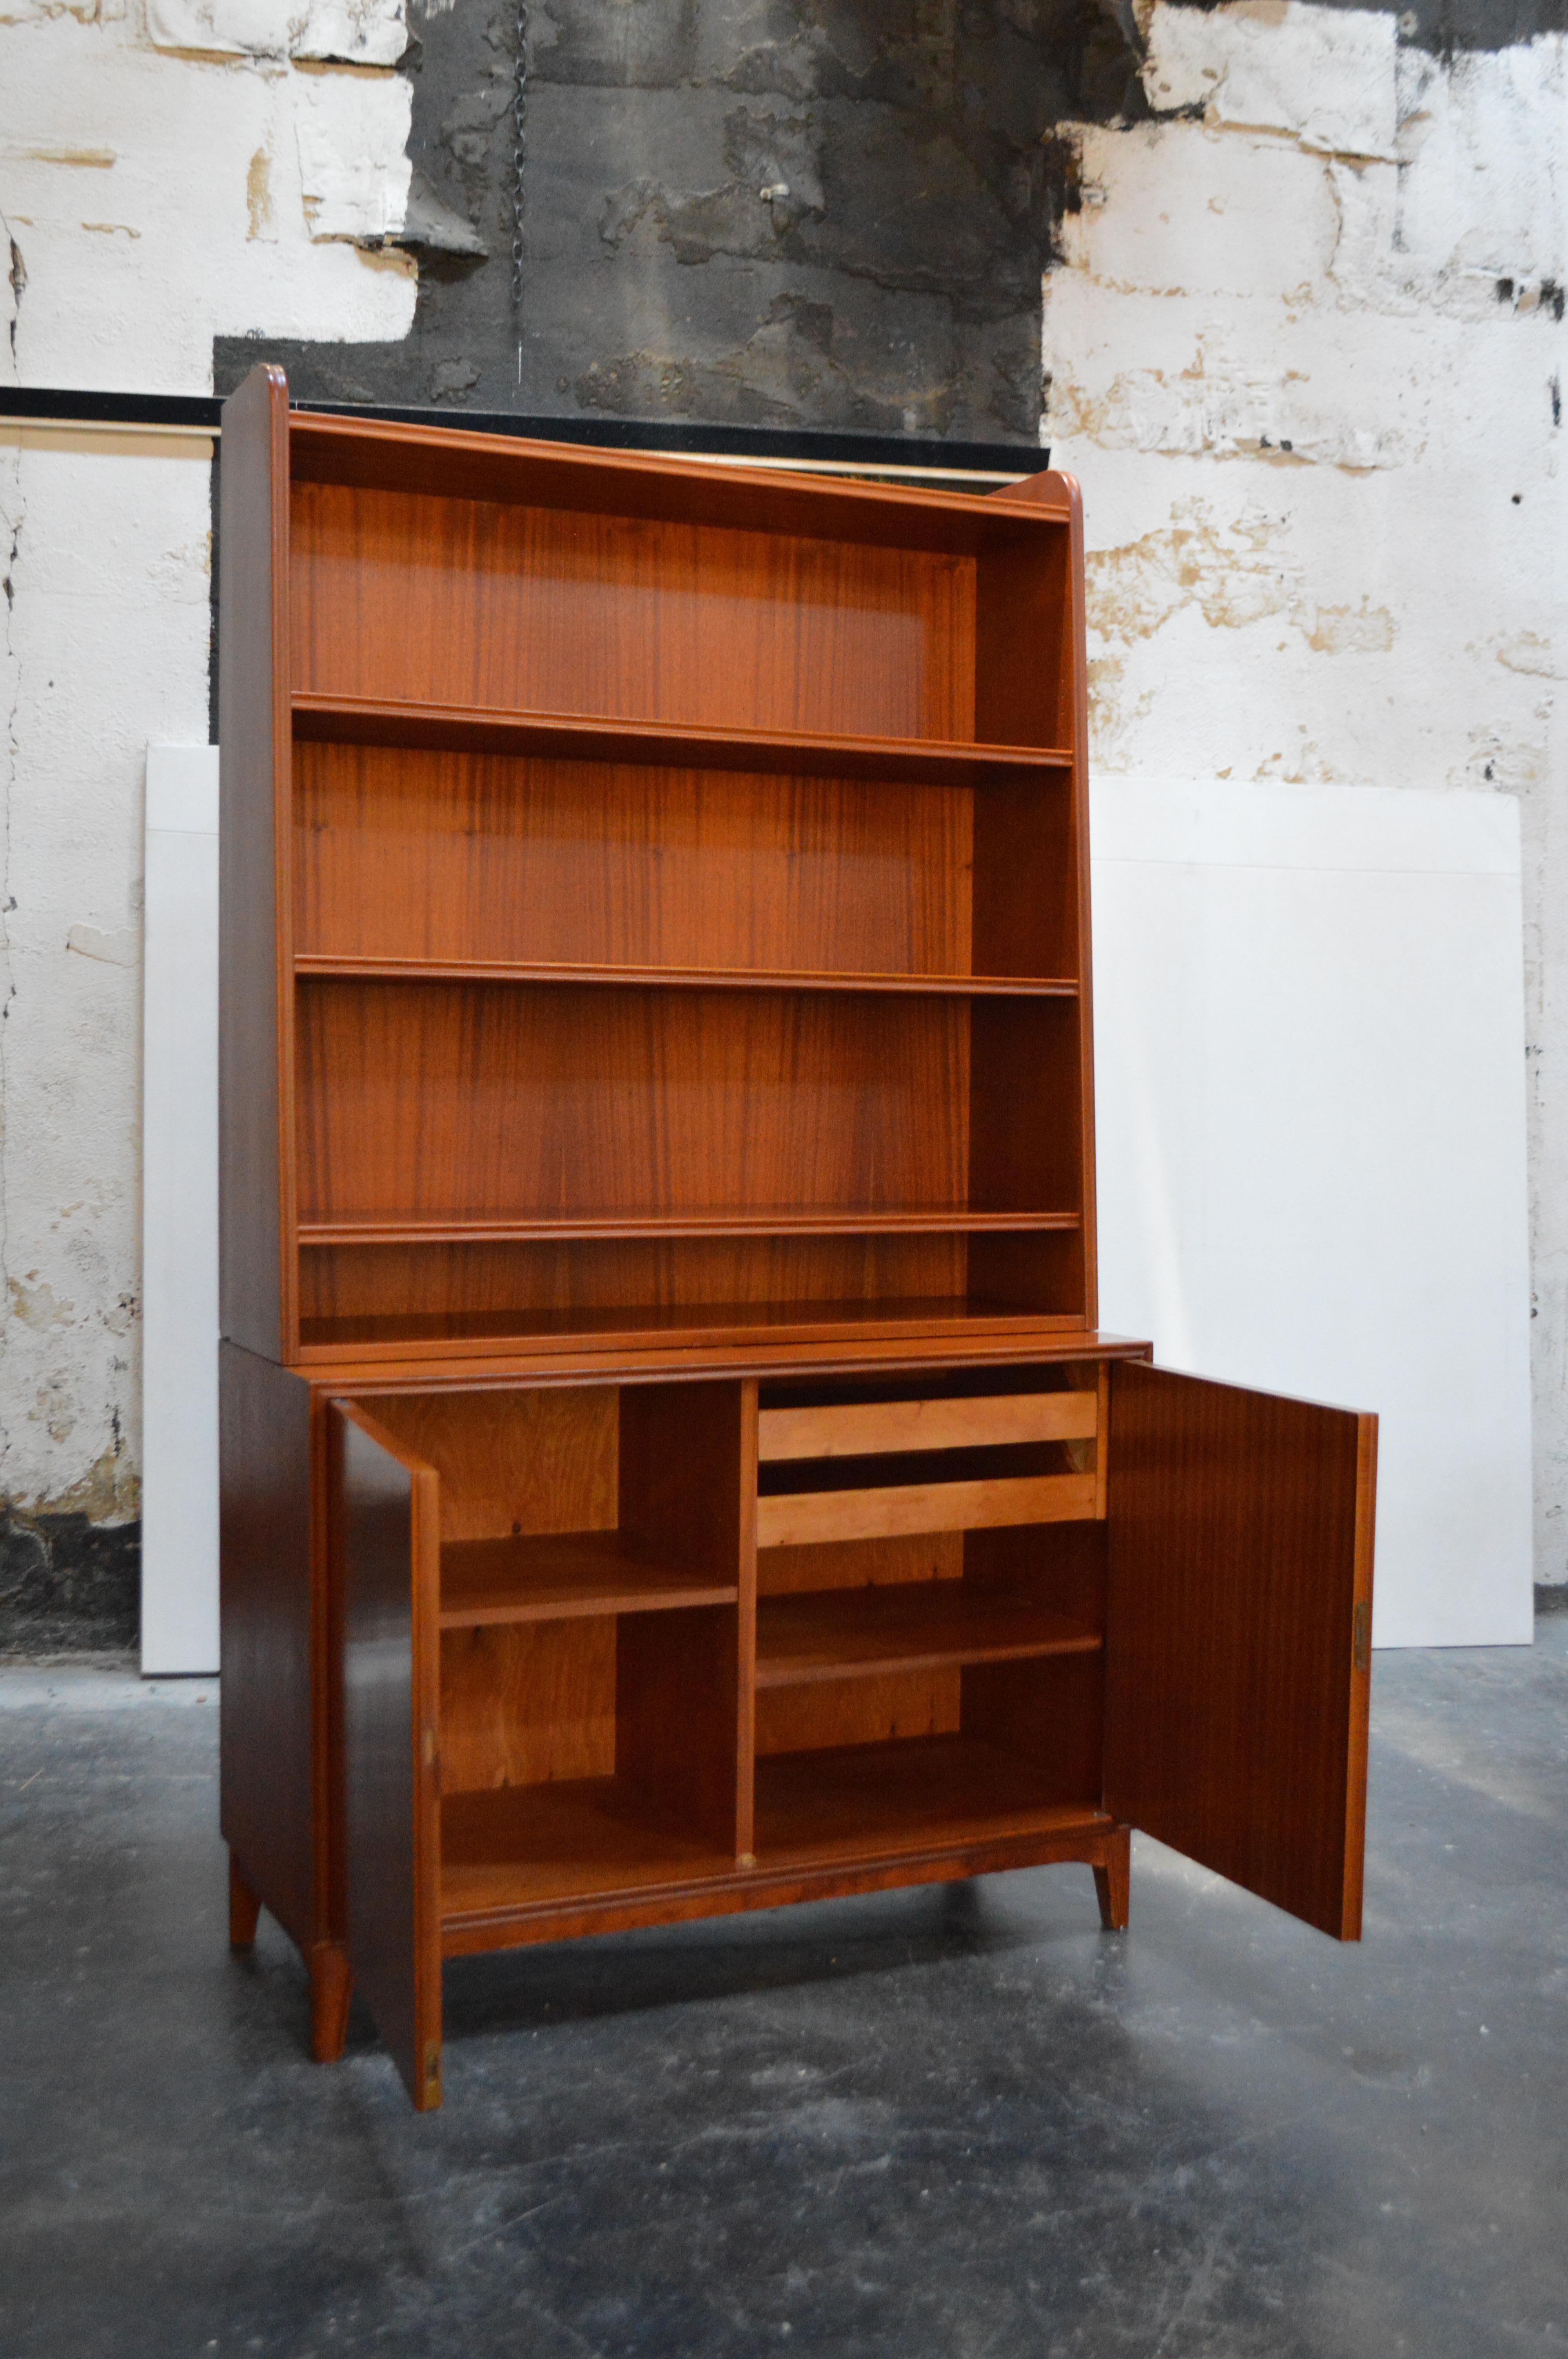 Beautiful Mid-Century Modern ribbon mahogany hutch manufactured by Brantorps in Sweden. The top shelving unit can be separated from the bottom cabinet/cupboard piece. 

Measures: Shelves: 11 D x 39.5 W x 41.5 H
Cabinet: 15.75 D x 39.5 W x 27.5